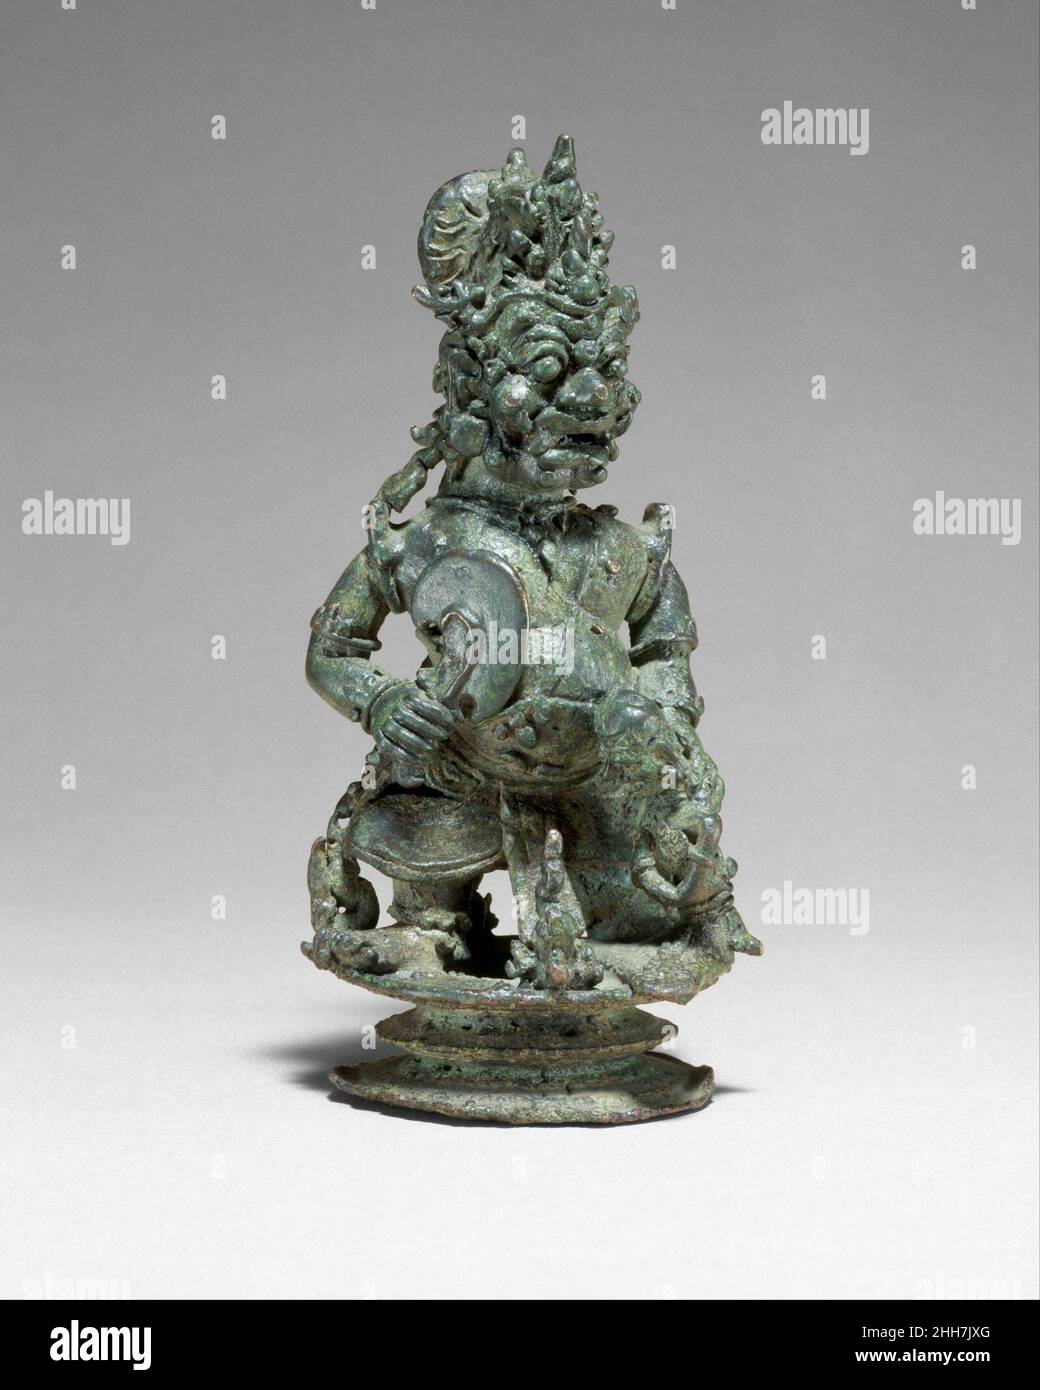 Top of a Bell in the Form of a Demon King or Guardian ca. second half of the 12th–early 13th century Indonesia (Java) This finial from a hanging bell takes the form of an unusually lively and finely modeled rakshasa—a demon king or guardian. He is depicted as a short, potbellied grimacing creature with fangs and large bulbous eyes and a serpent emerging from each armpit. A curved broad chopper is held in his right hand, and his left is placed behind the neck of a hapless victim with bound hands who is seated in front of him. The hair is pulled back and arranged in a loop to allow for the attac Stock Photo